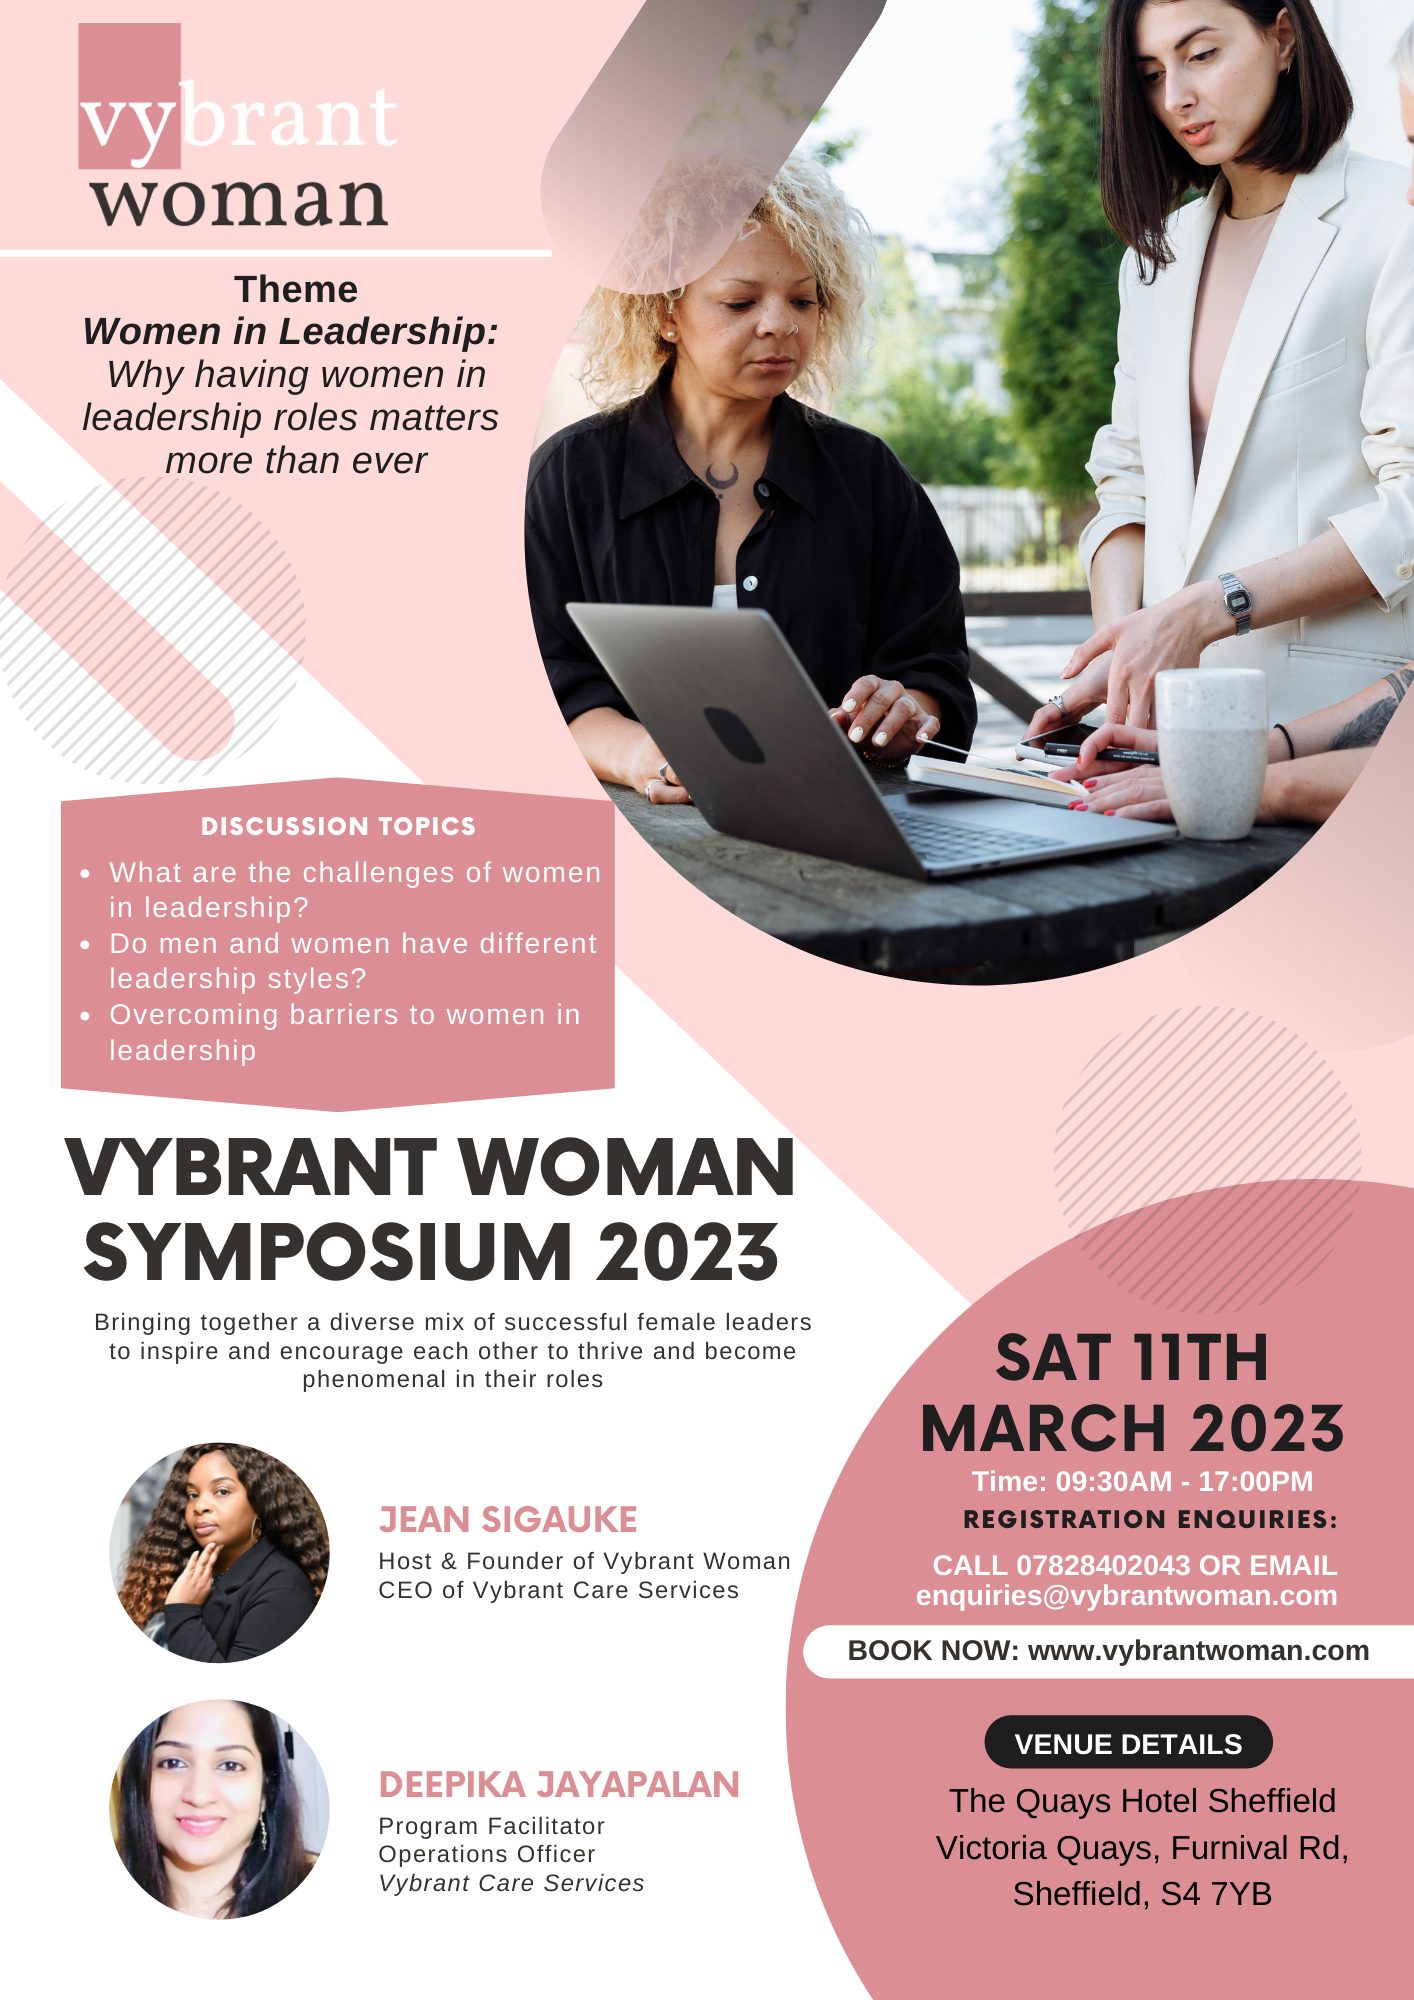 Vybrant Woman SYMPOSIUM Women in Leadership: Why having women in leadership roles matters  more than ever on Mar 11, 09:30@The Quays Hotel - Buy tickets and Get information on www.vybrantwoman.com 